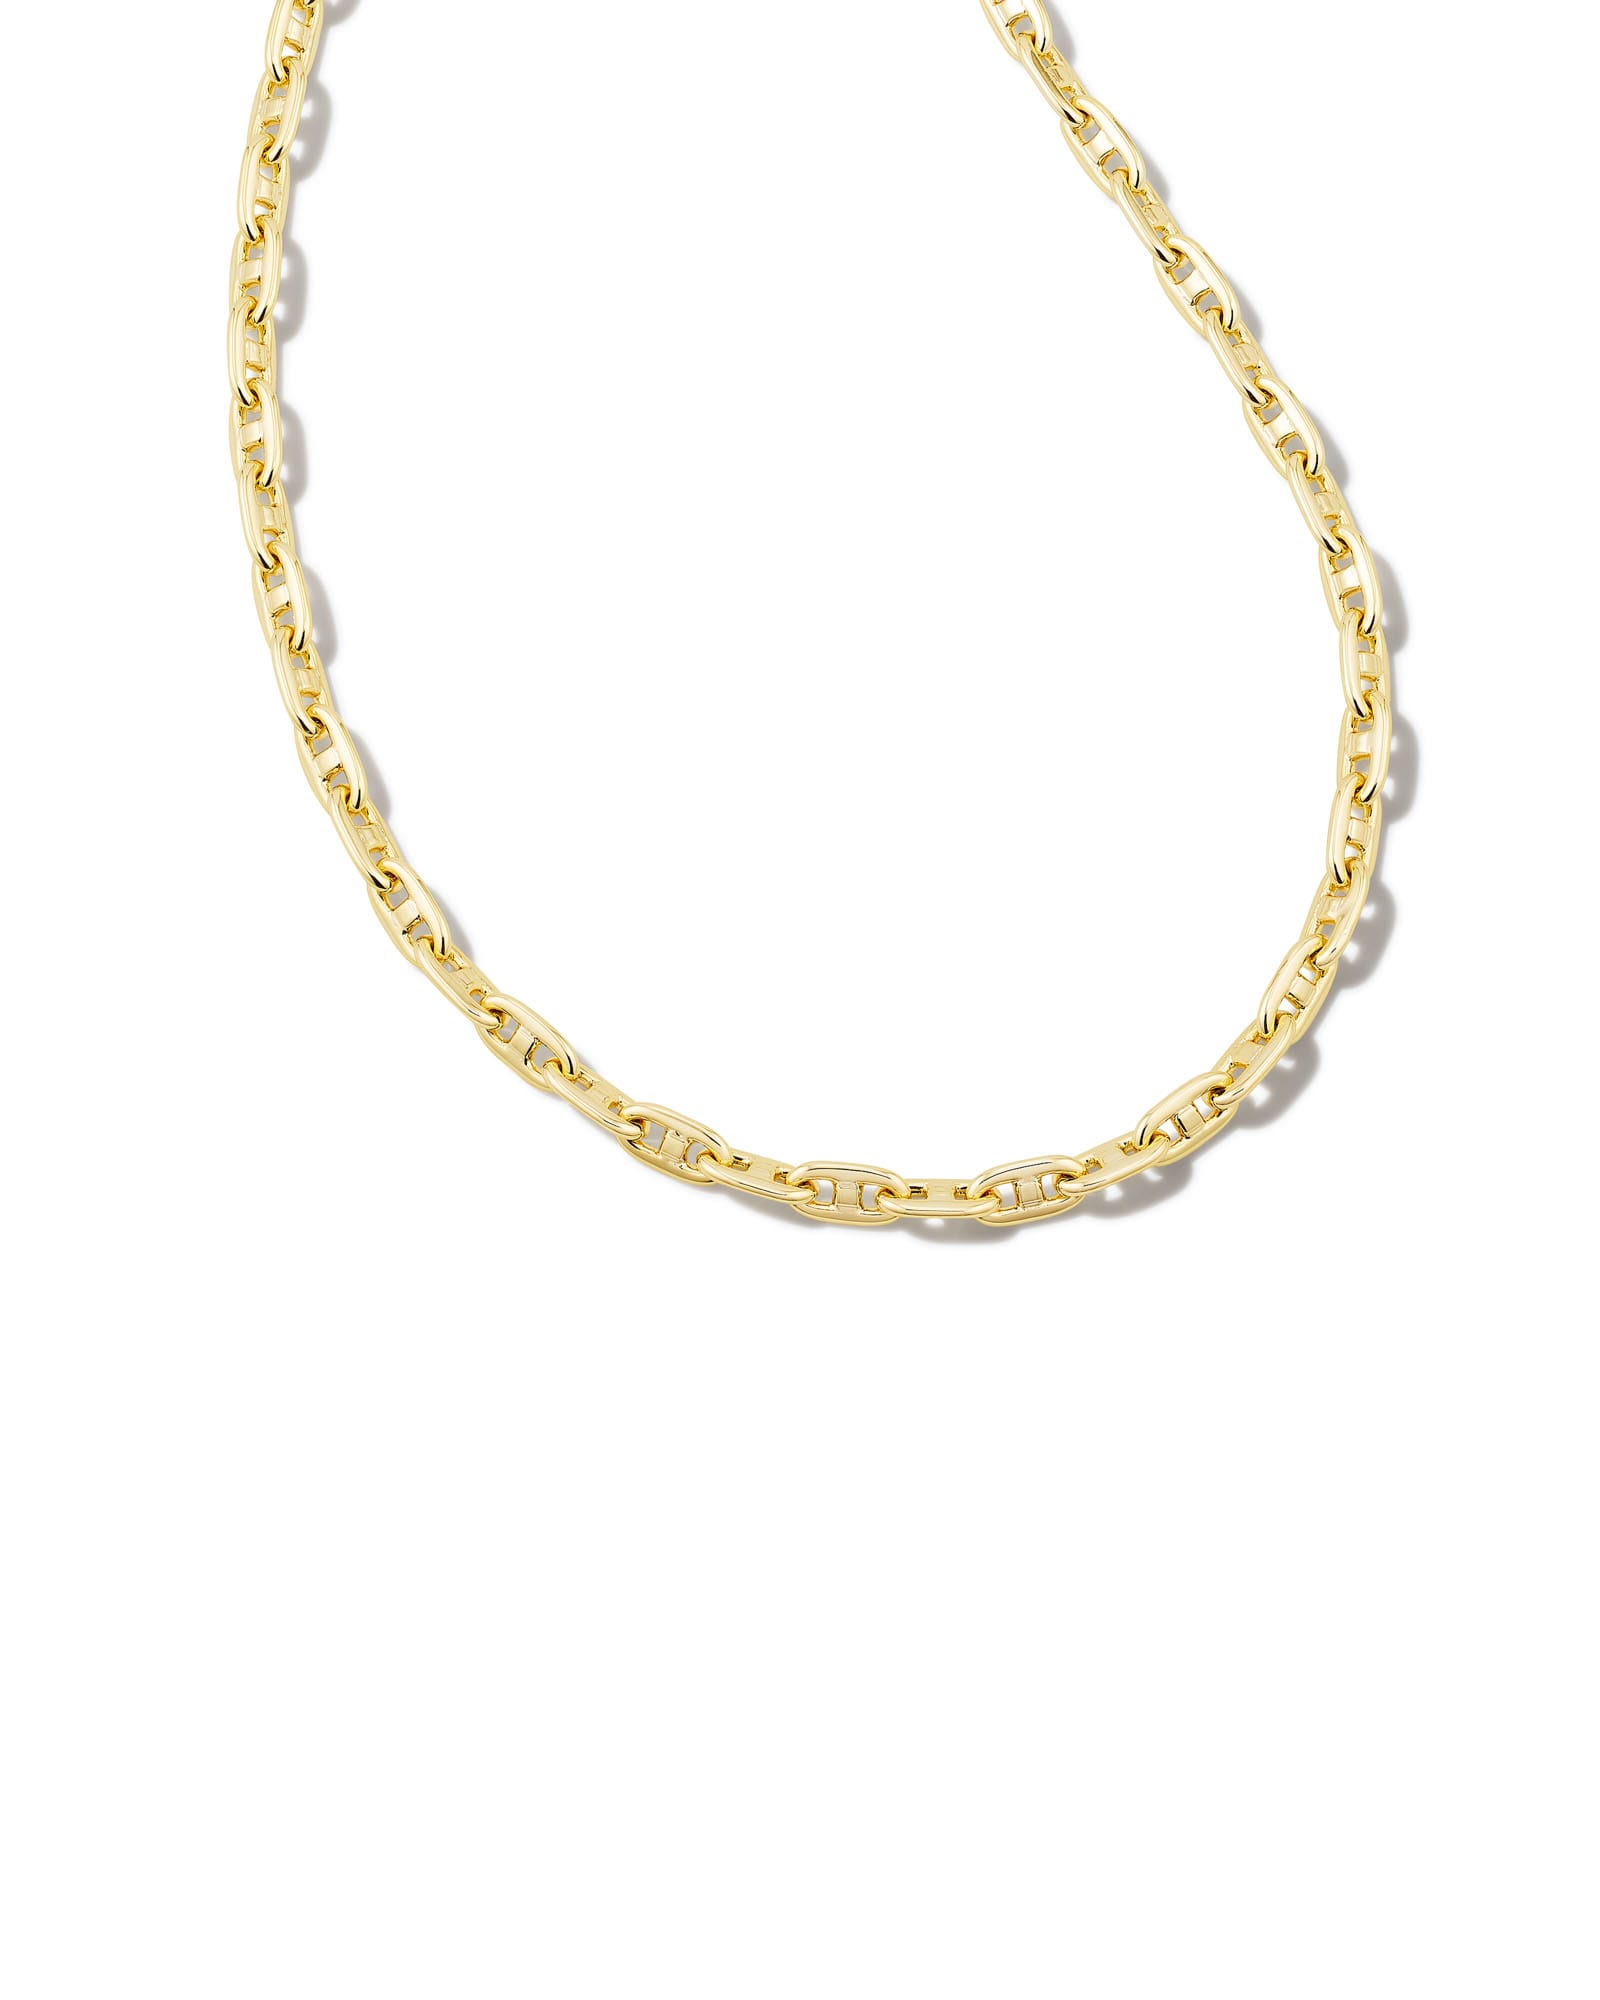 Kendra Scott Bailey Chain Necklace in Gold | Plated Brass/Metal